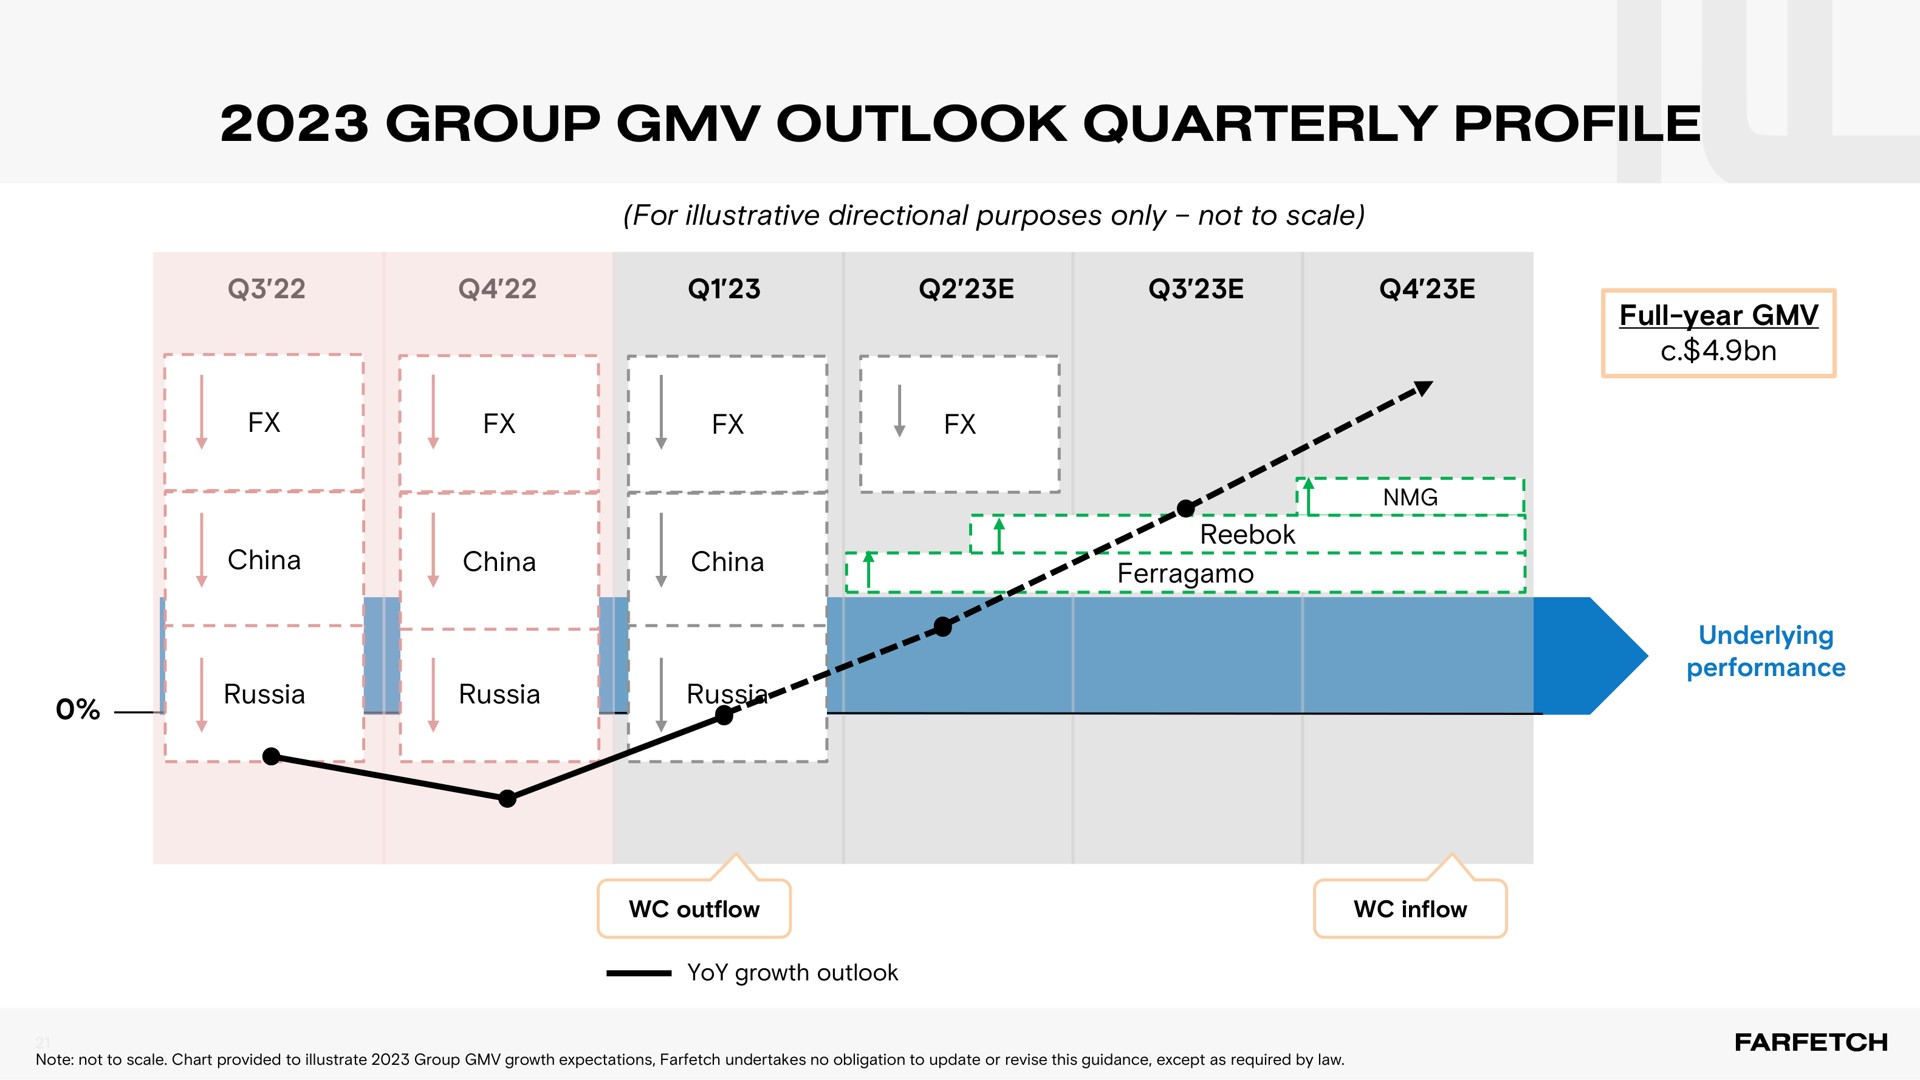 group outlook quarterly profile | Farfetch